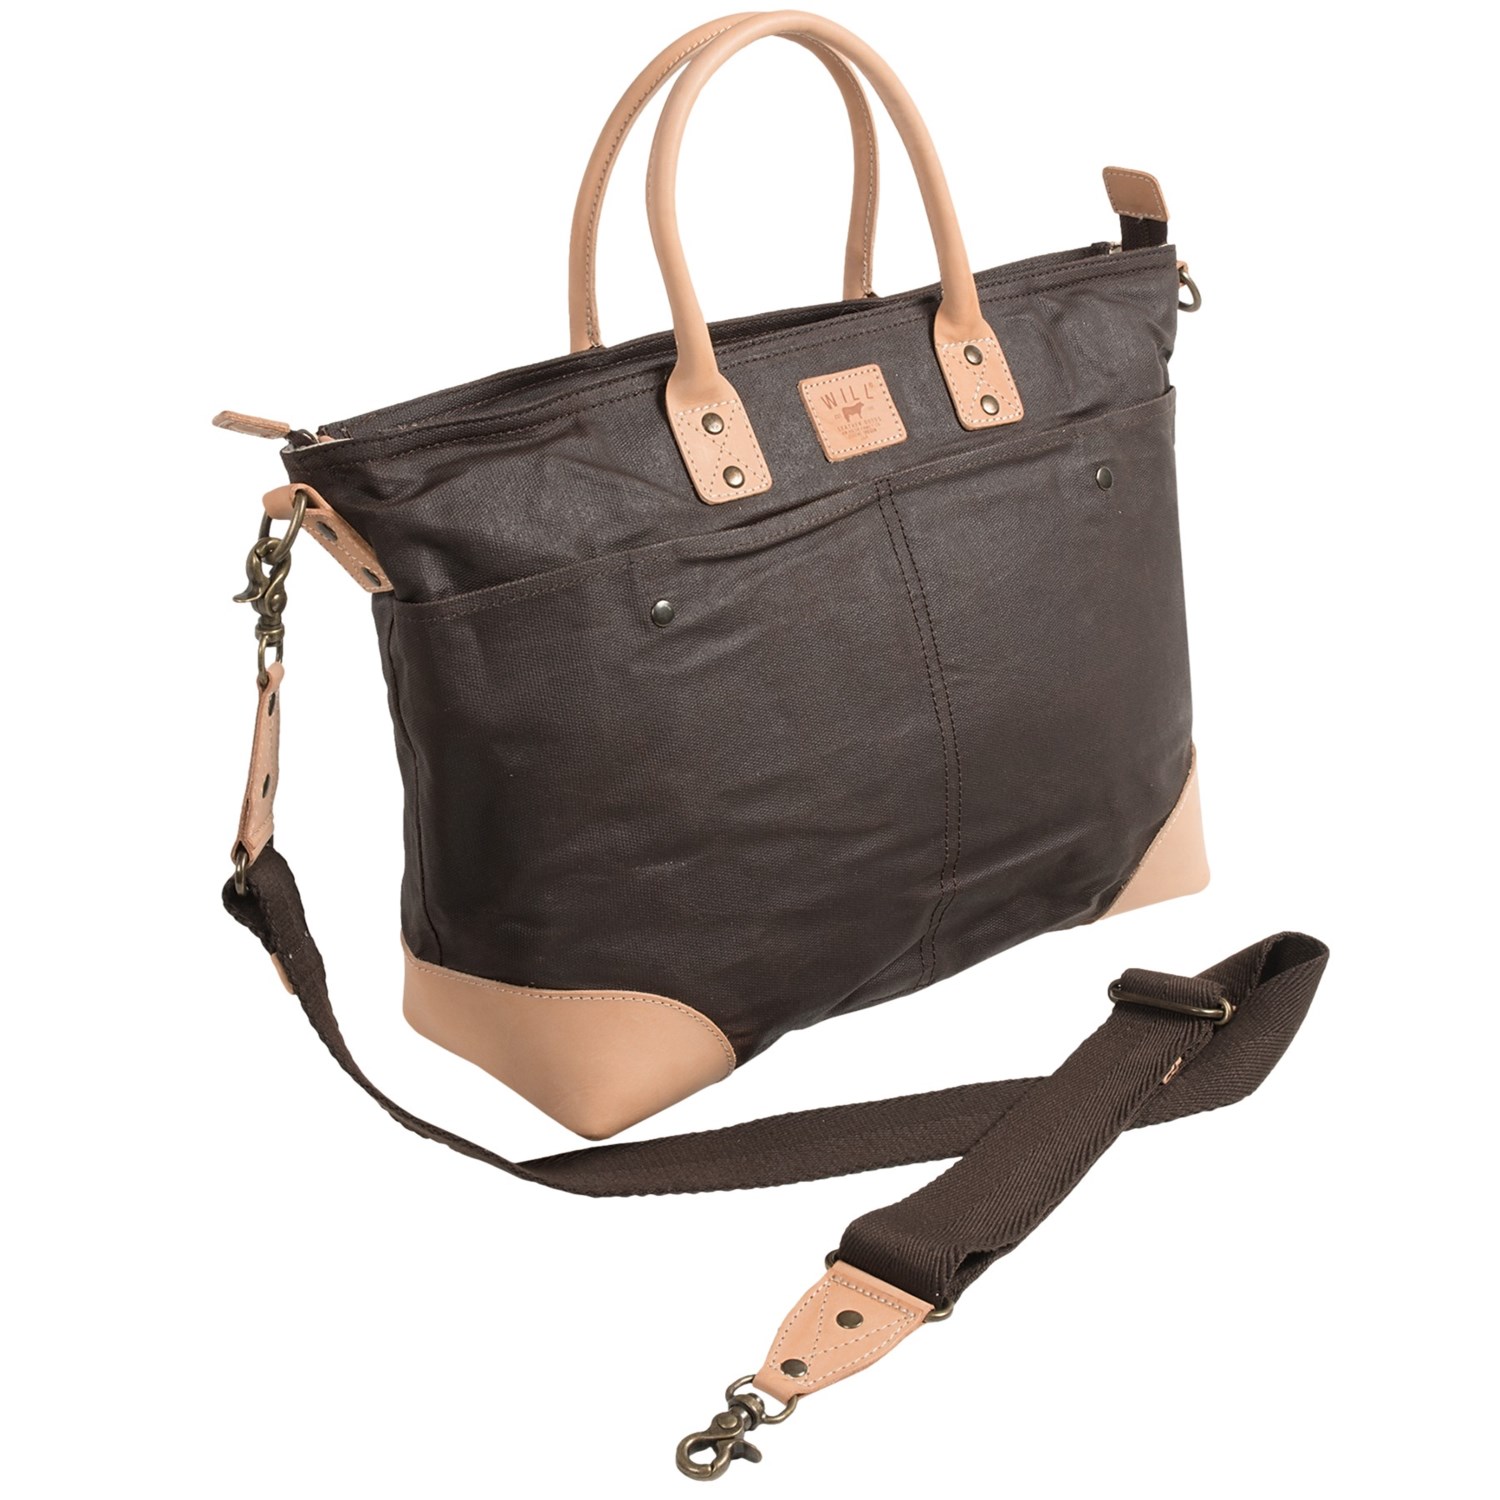 Will Leather Goods Waxed Canvas Tote Bag - Laptop Sleeve - Save 32%